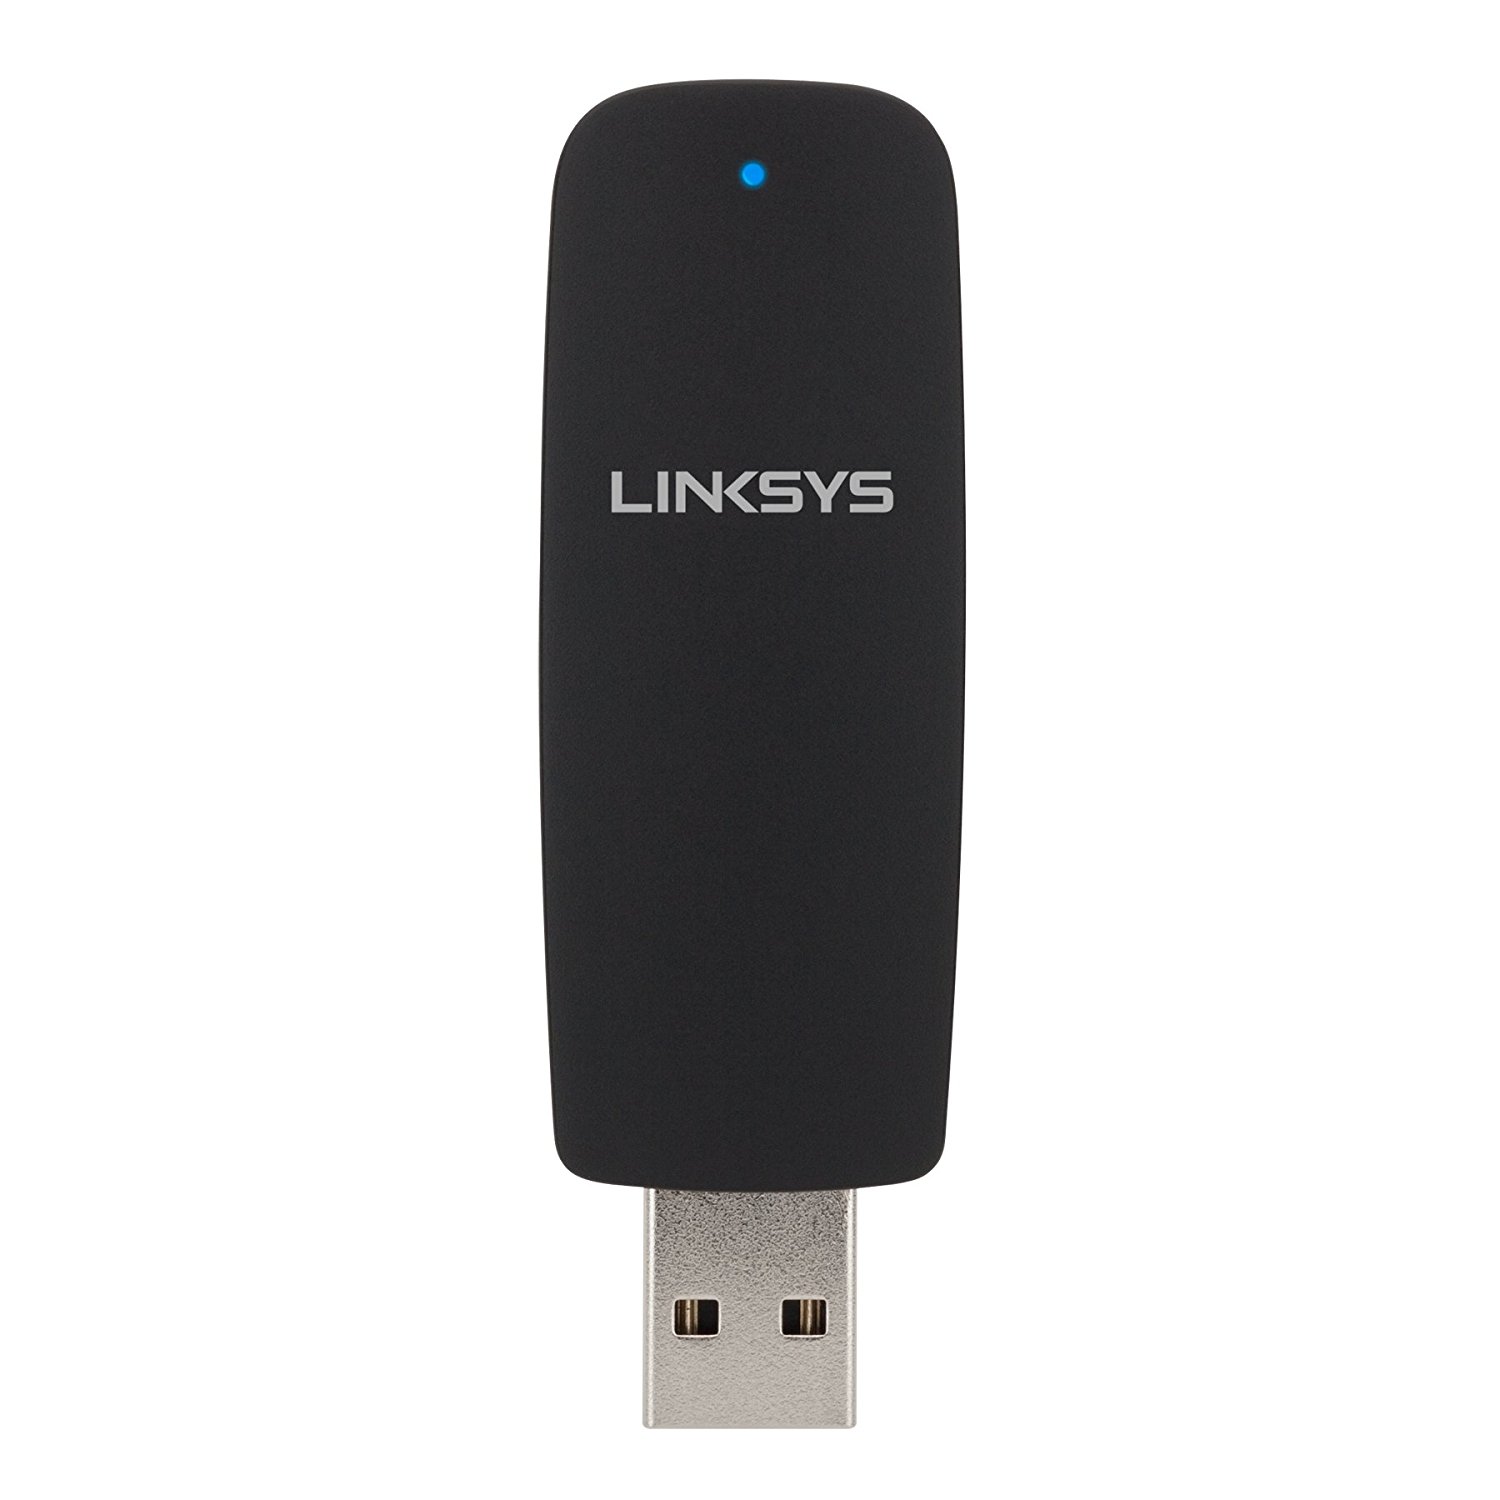 cisco linksys ae1000 software download